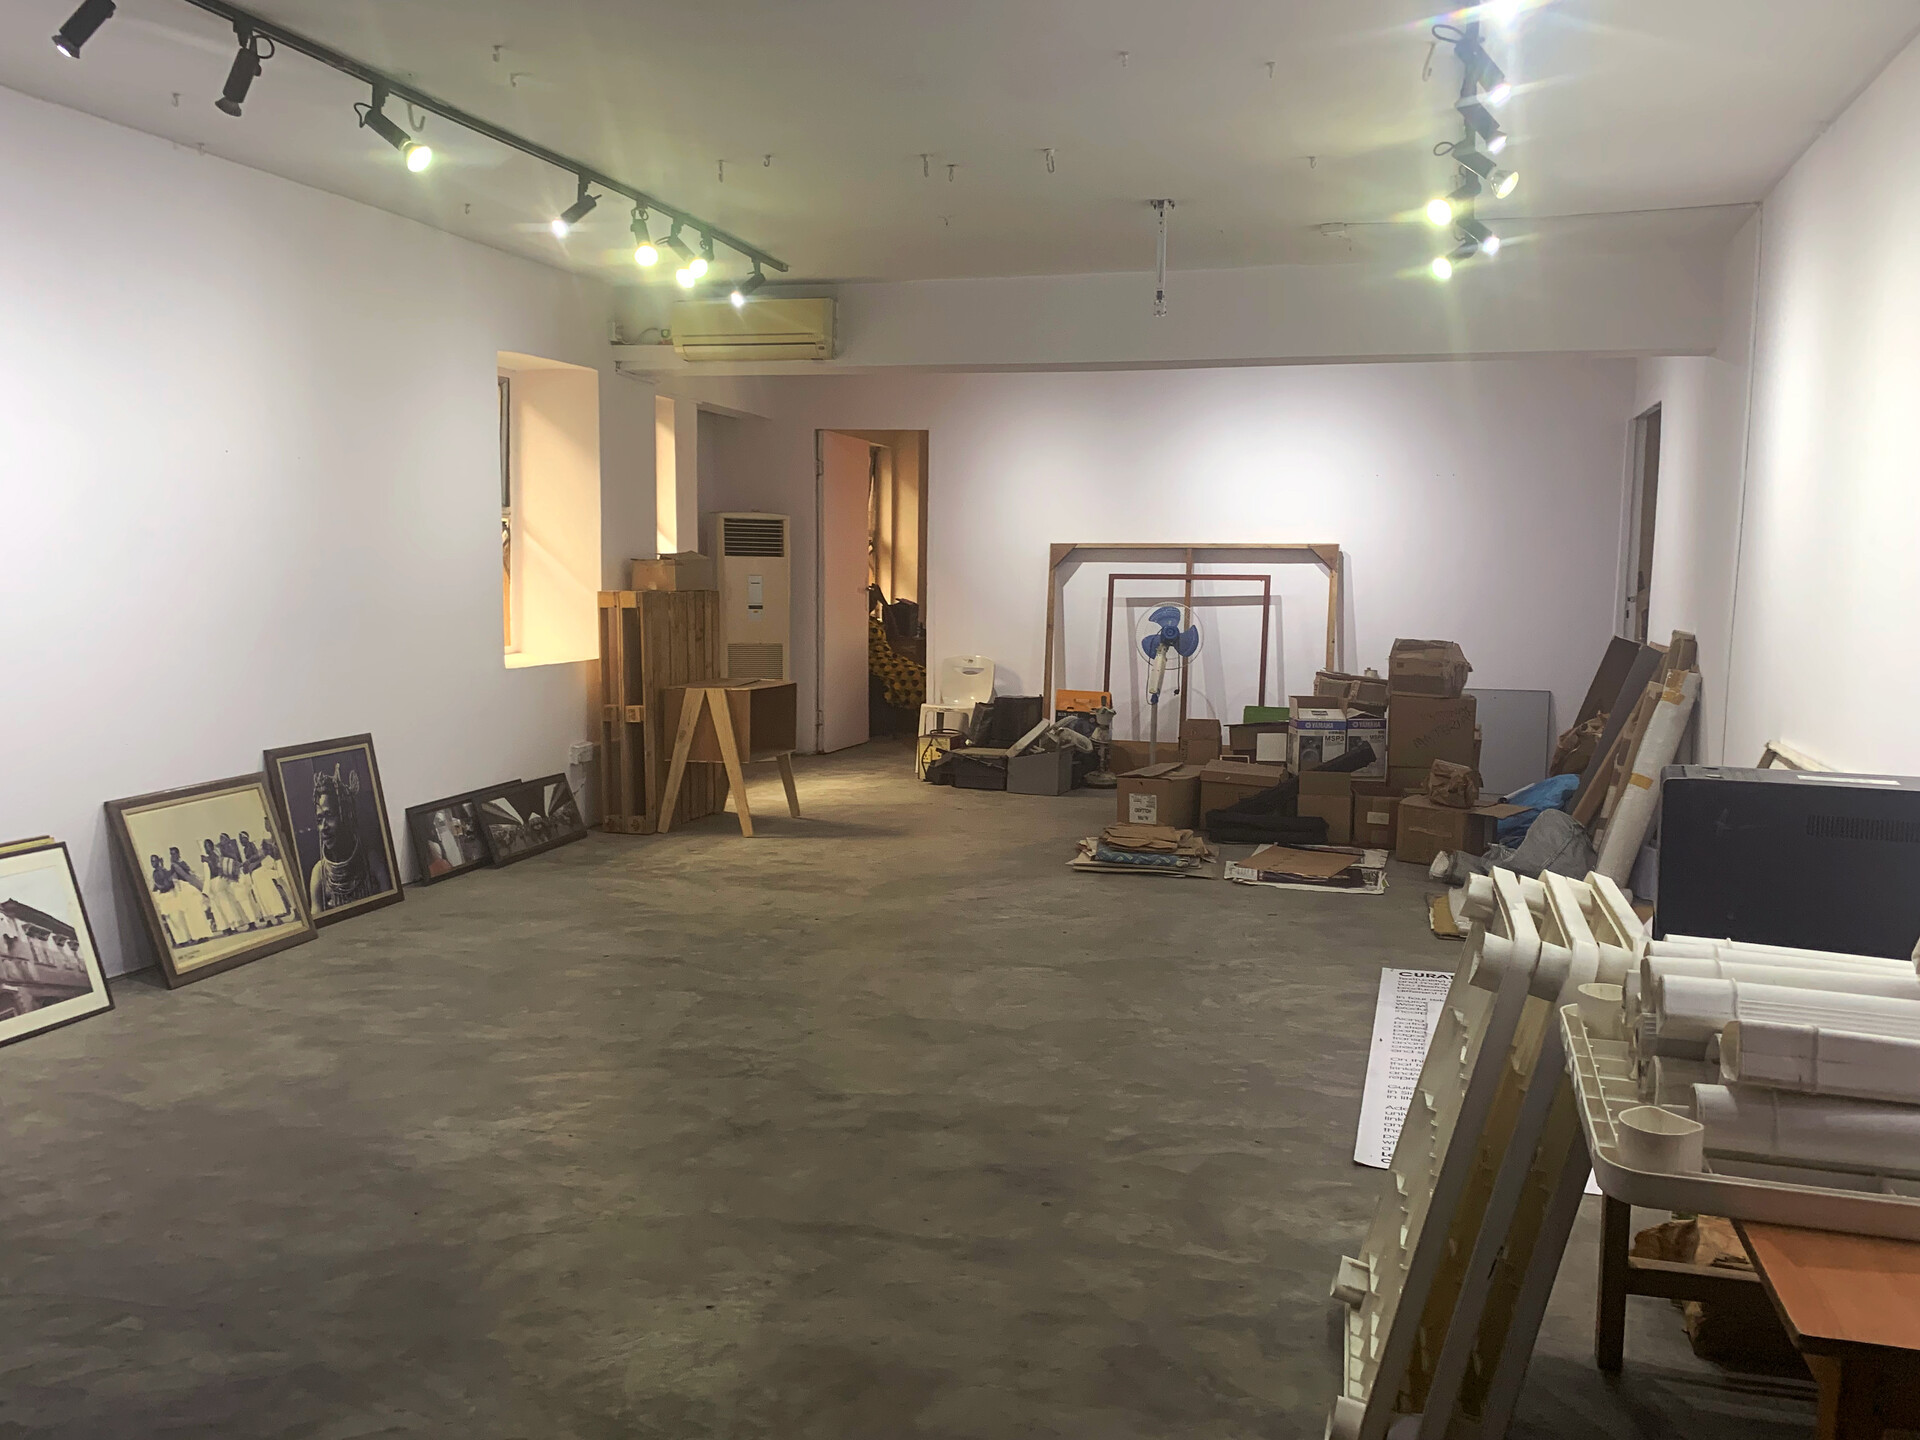 The exhibition space at the CCA, Lagos. Image by author.